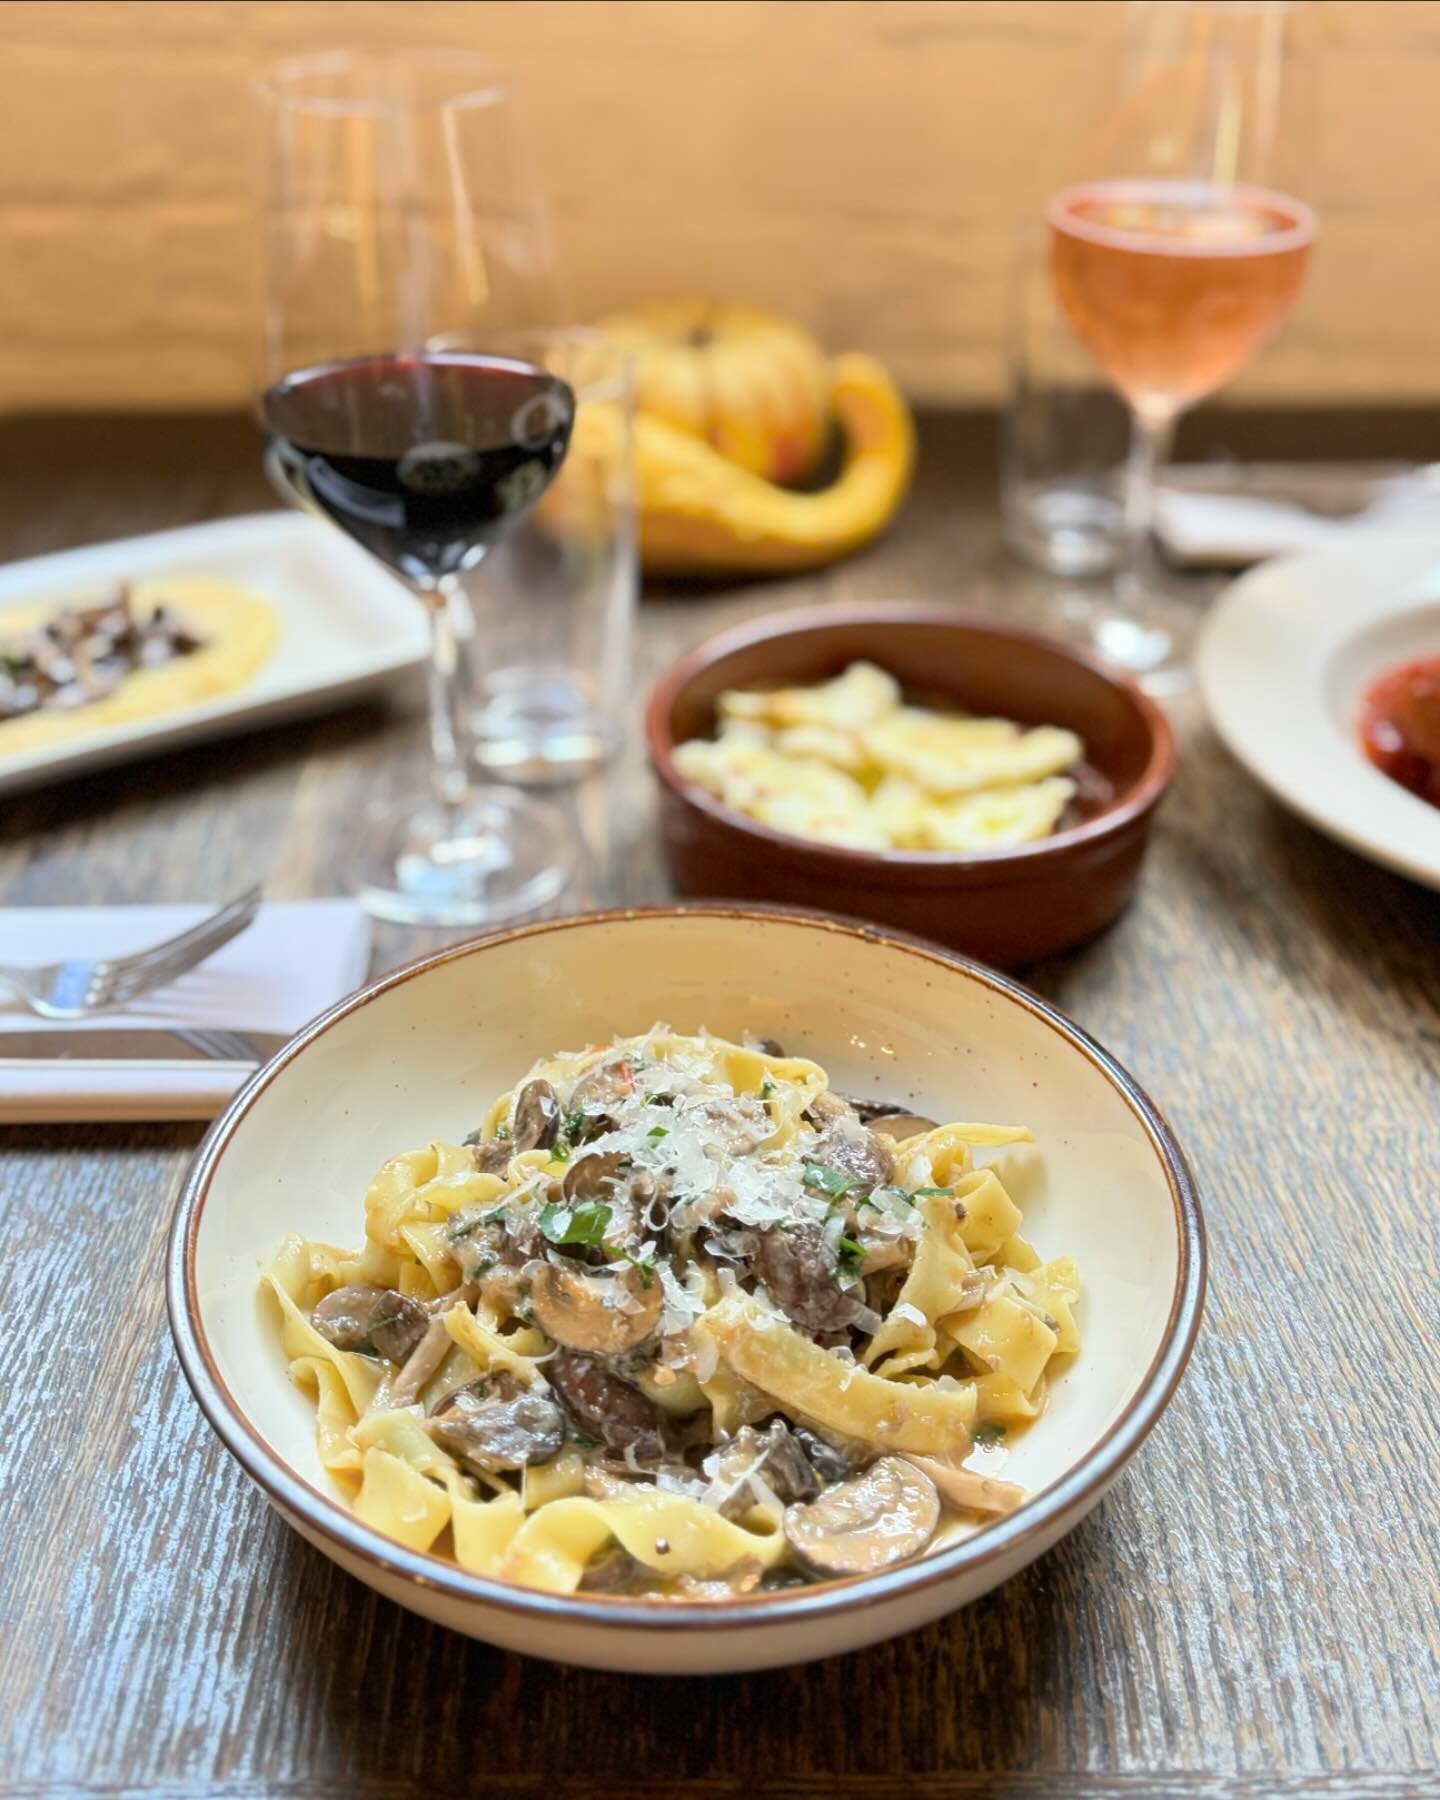 San Francisco Restaurant Week start today and we are excited to bring a special menu to the table. From our house made tagliatelle to the classic tiramisu. You have time until April 14th to savor some of our staple dishes. Can&rsquo;t wait to see you